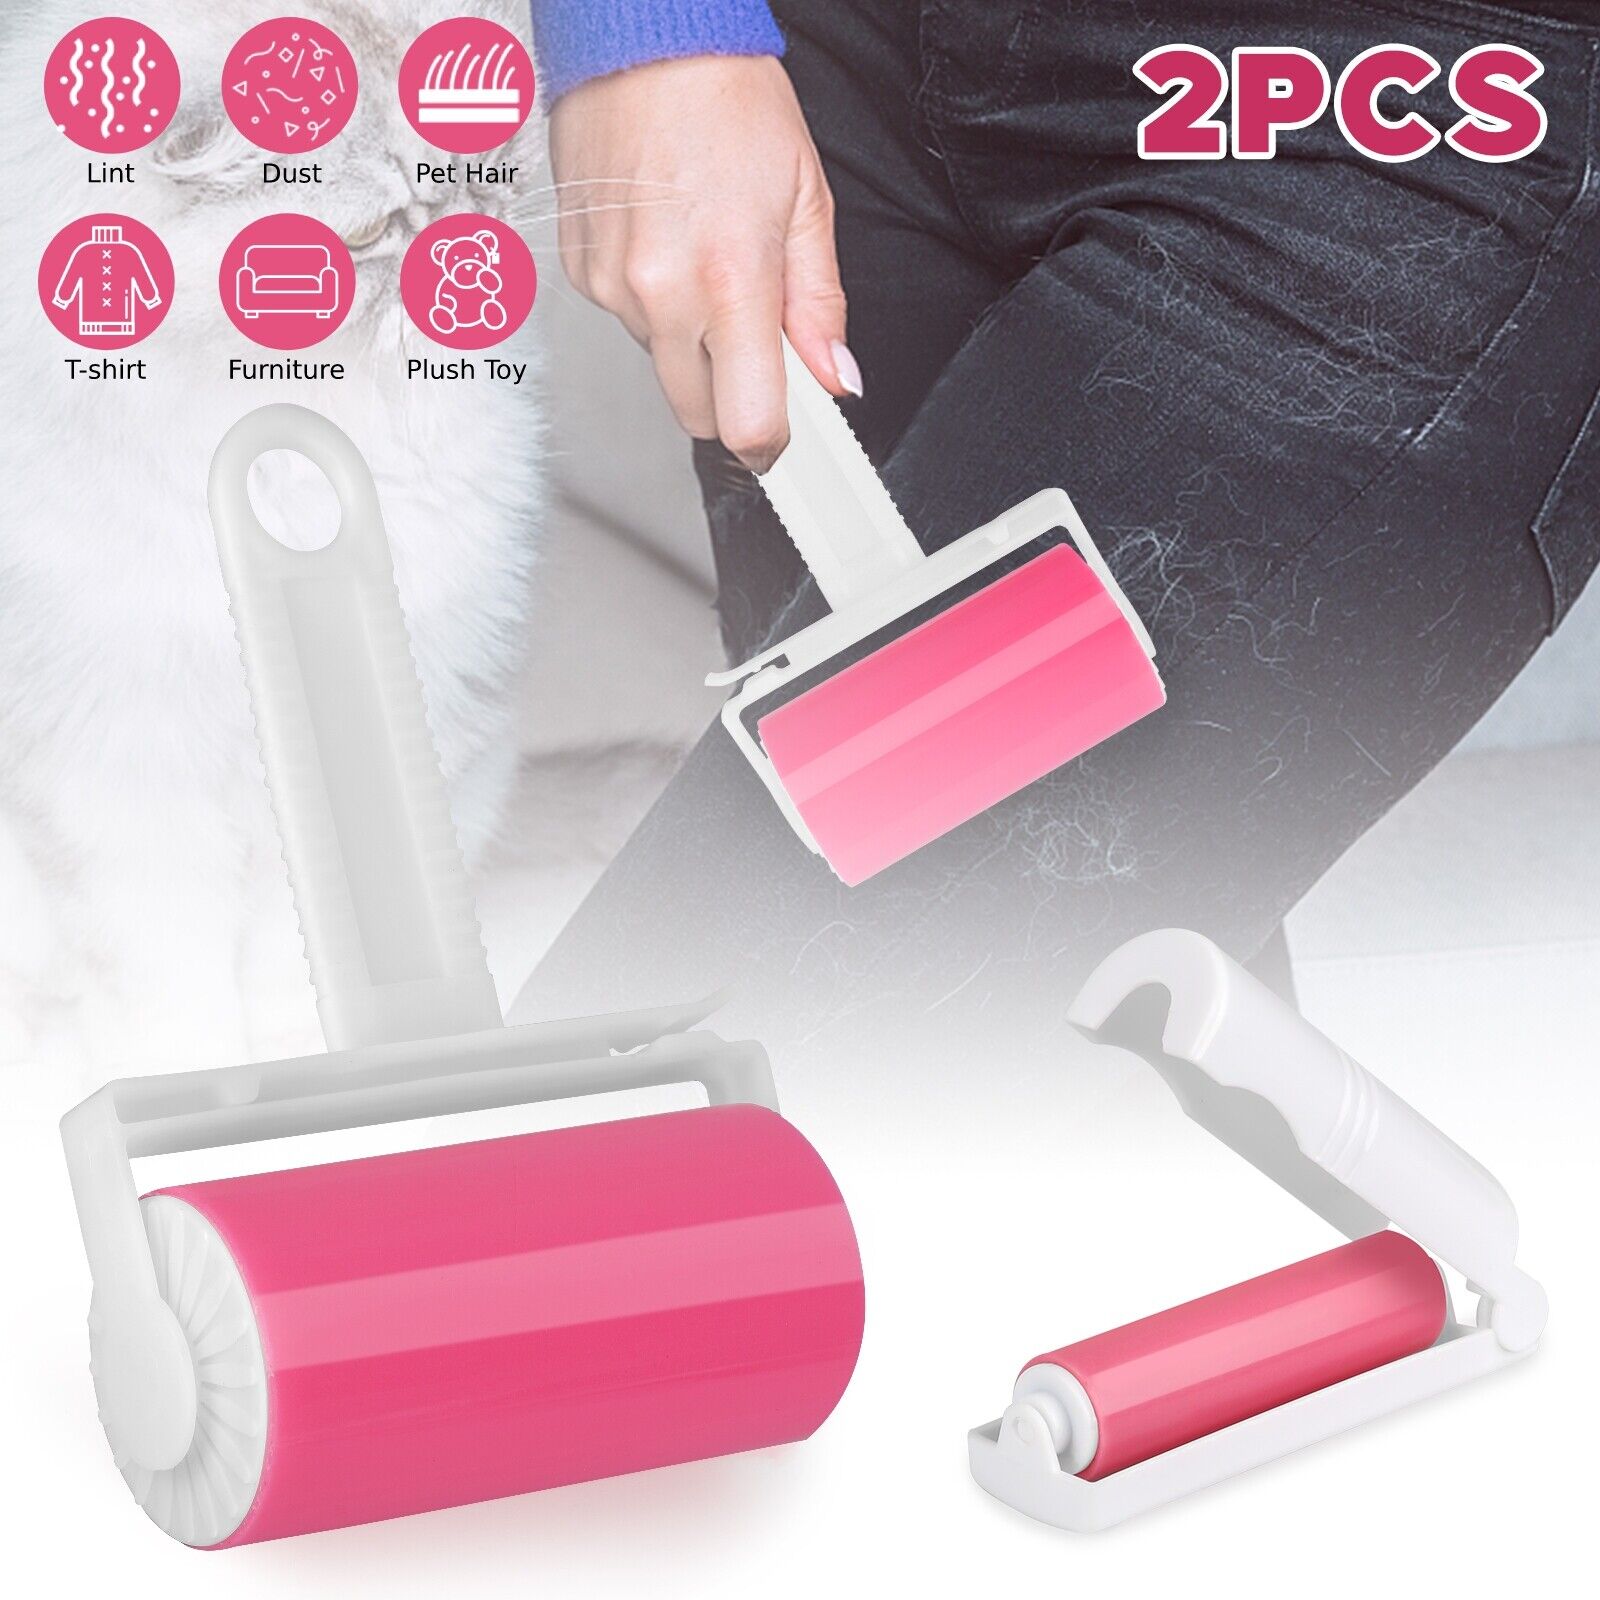 (2 Pc) Sticky Master Lint Roller It’s Tapeless, Washable, and Reusable for Lint Remove